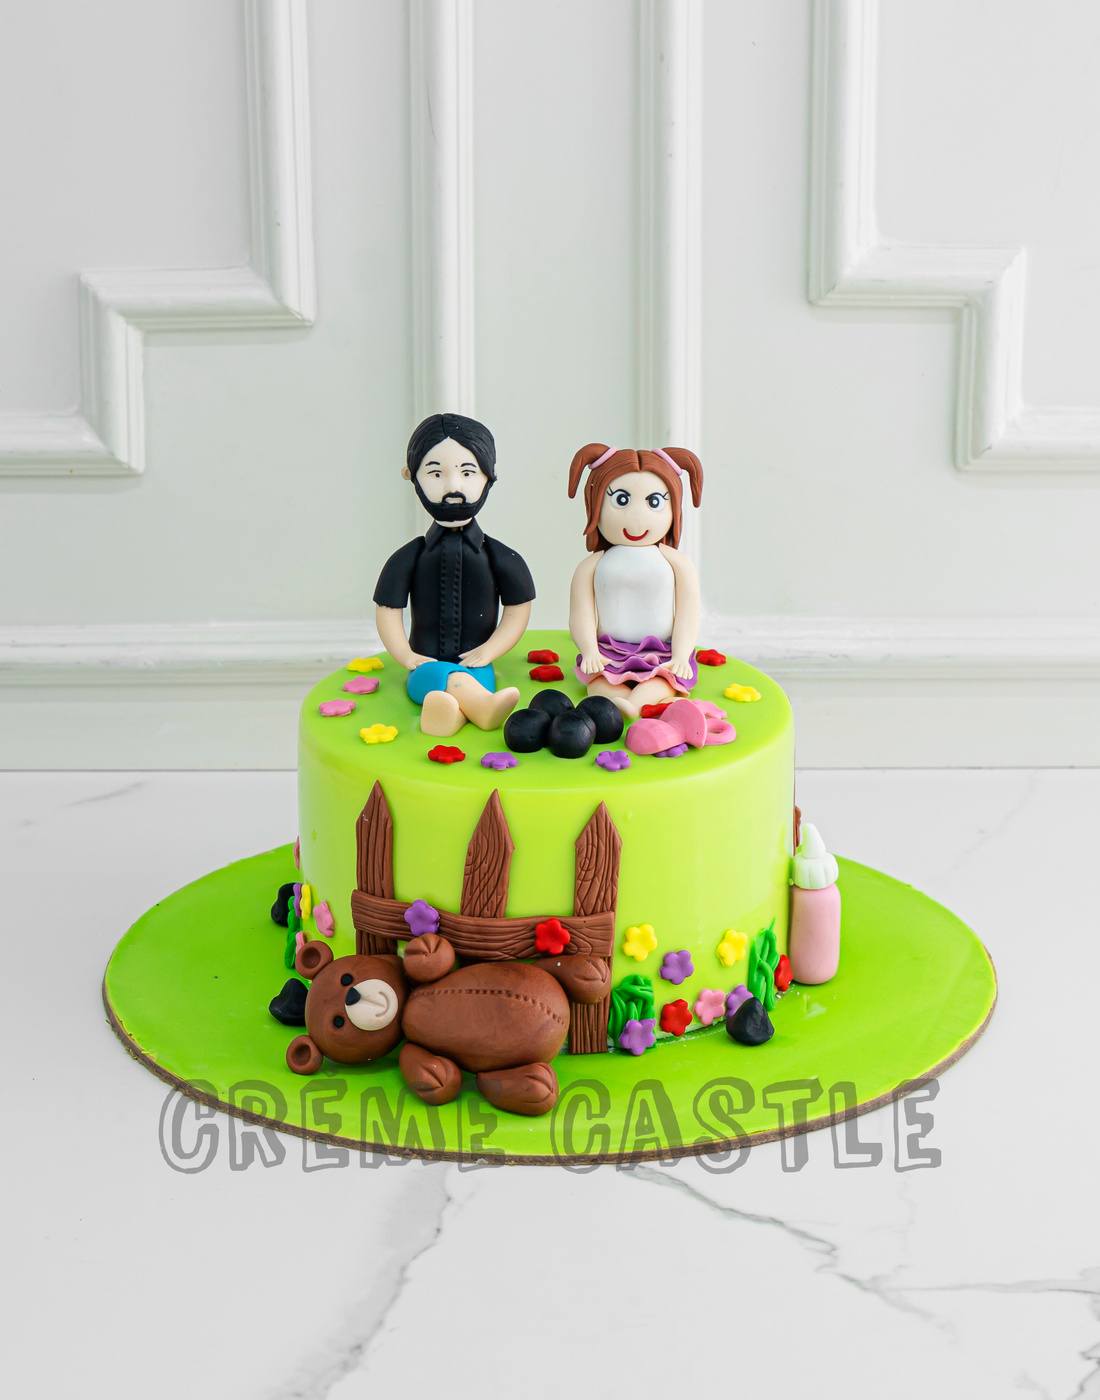 Dad and Daughter Theme Cake by Creme Castle